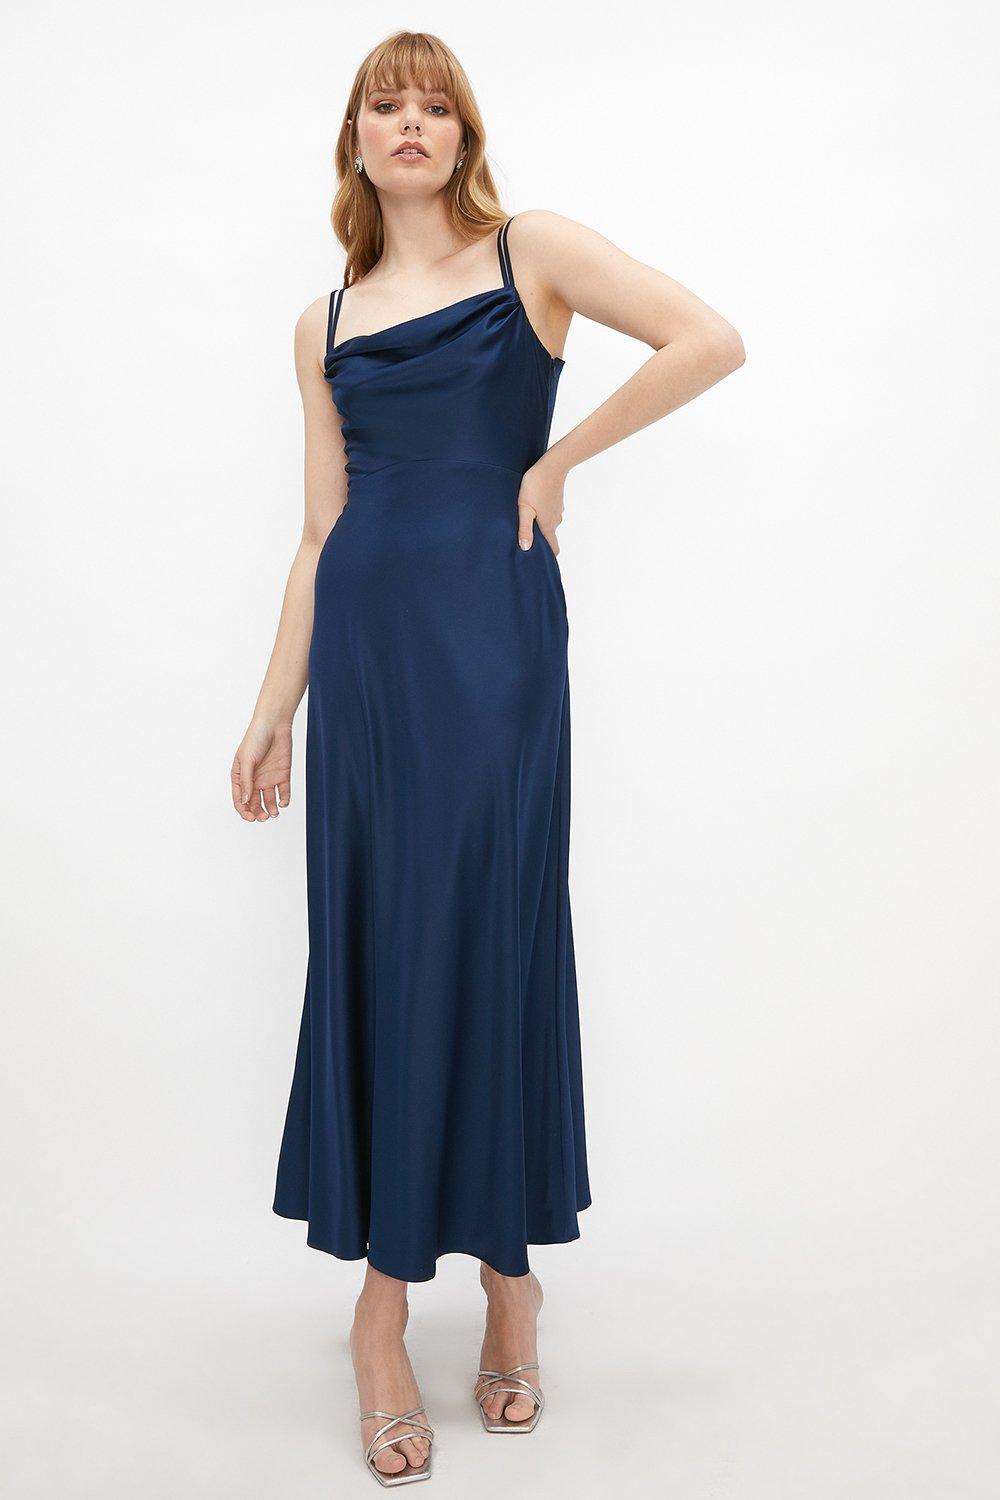 Oasis Cowl Double Strap Maxi Dress - Navy